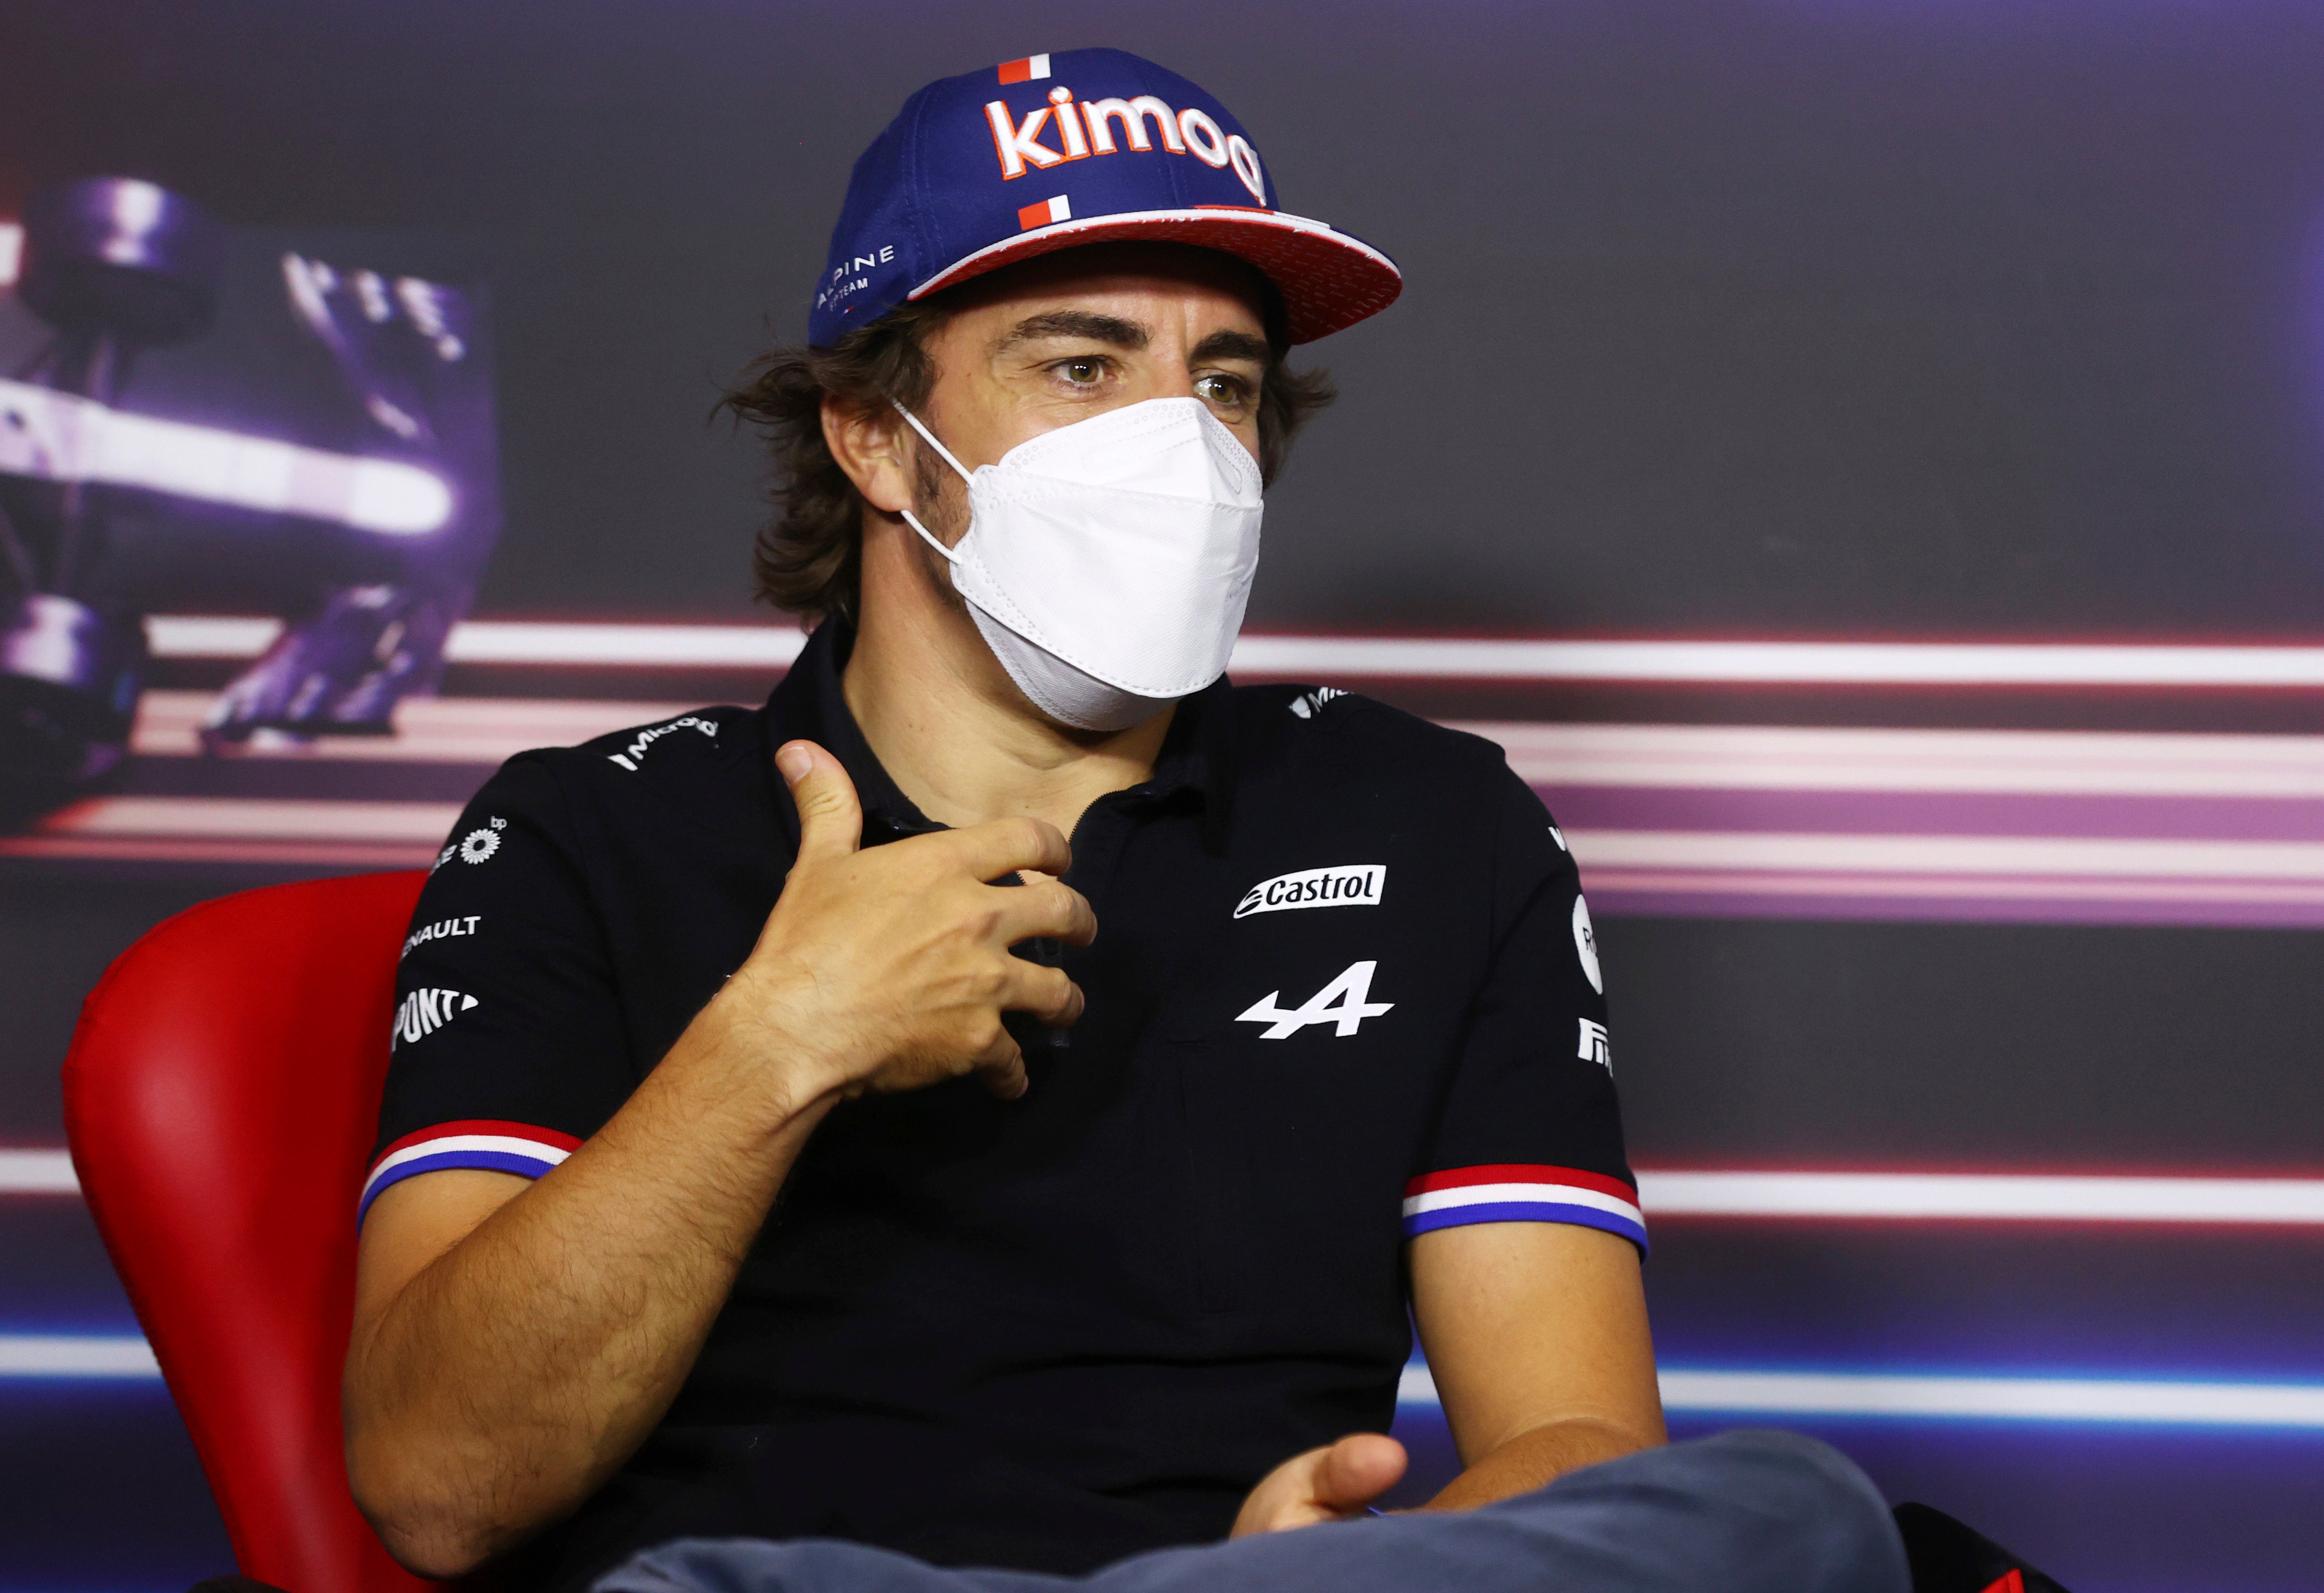 Fernando Alonso believes Max Verstappen is the favourite to win the title